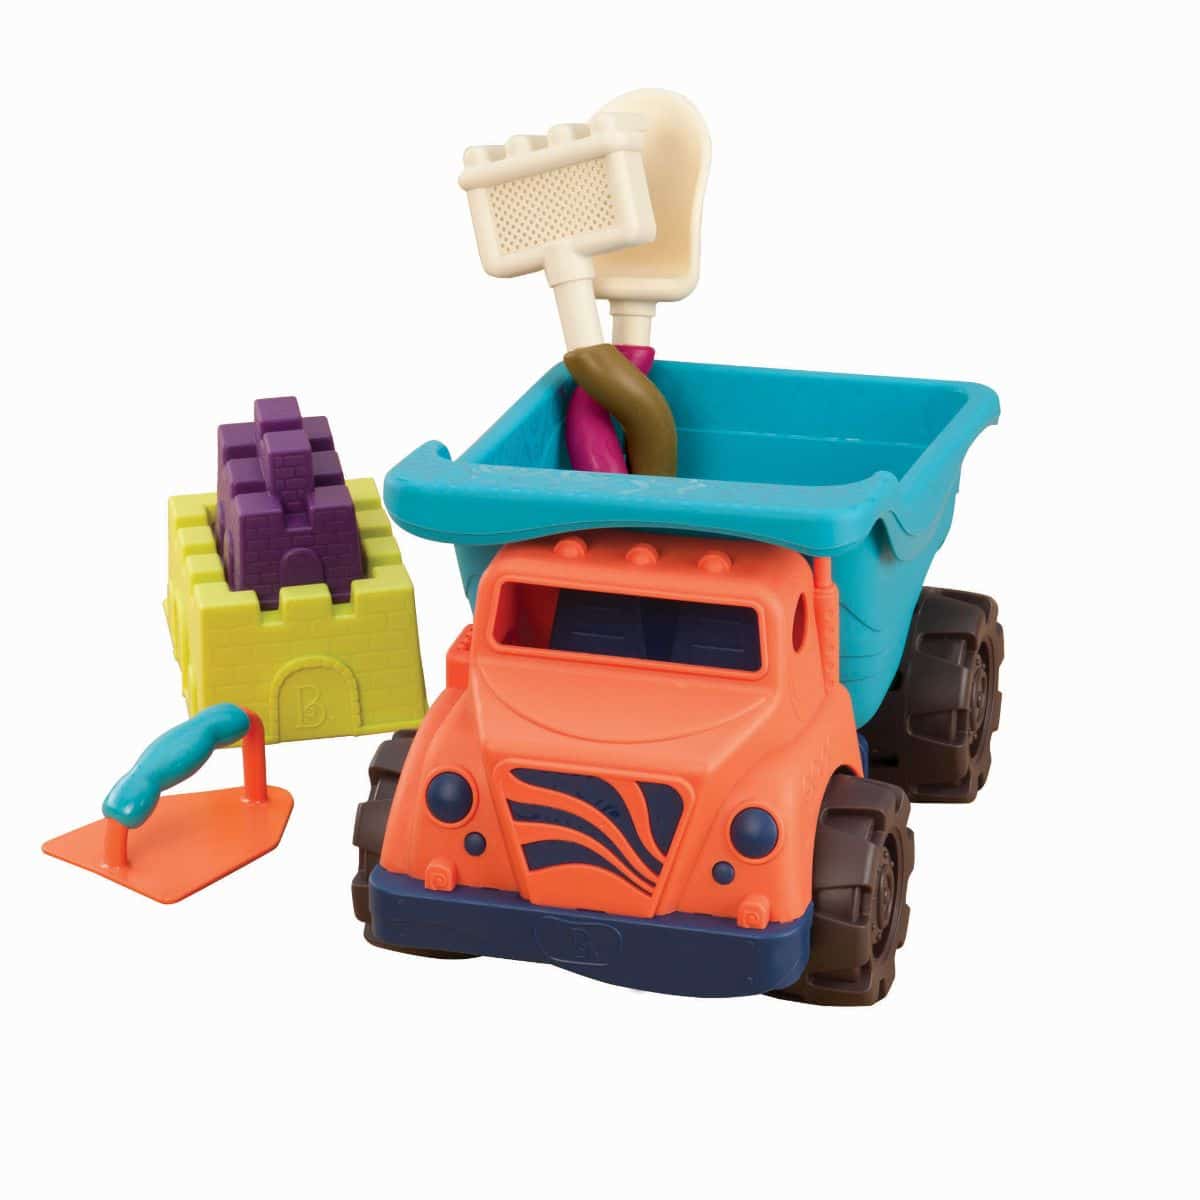 Dump truck and sand toys